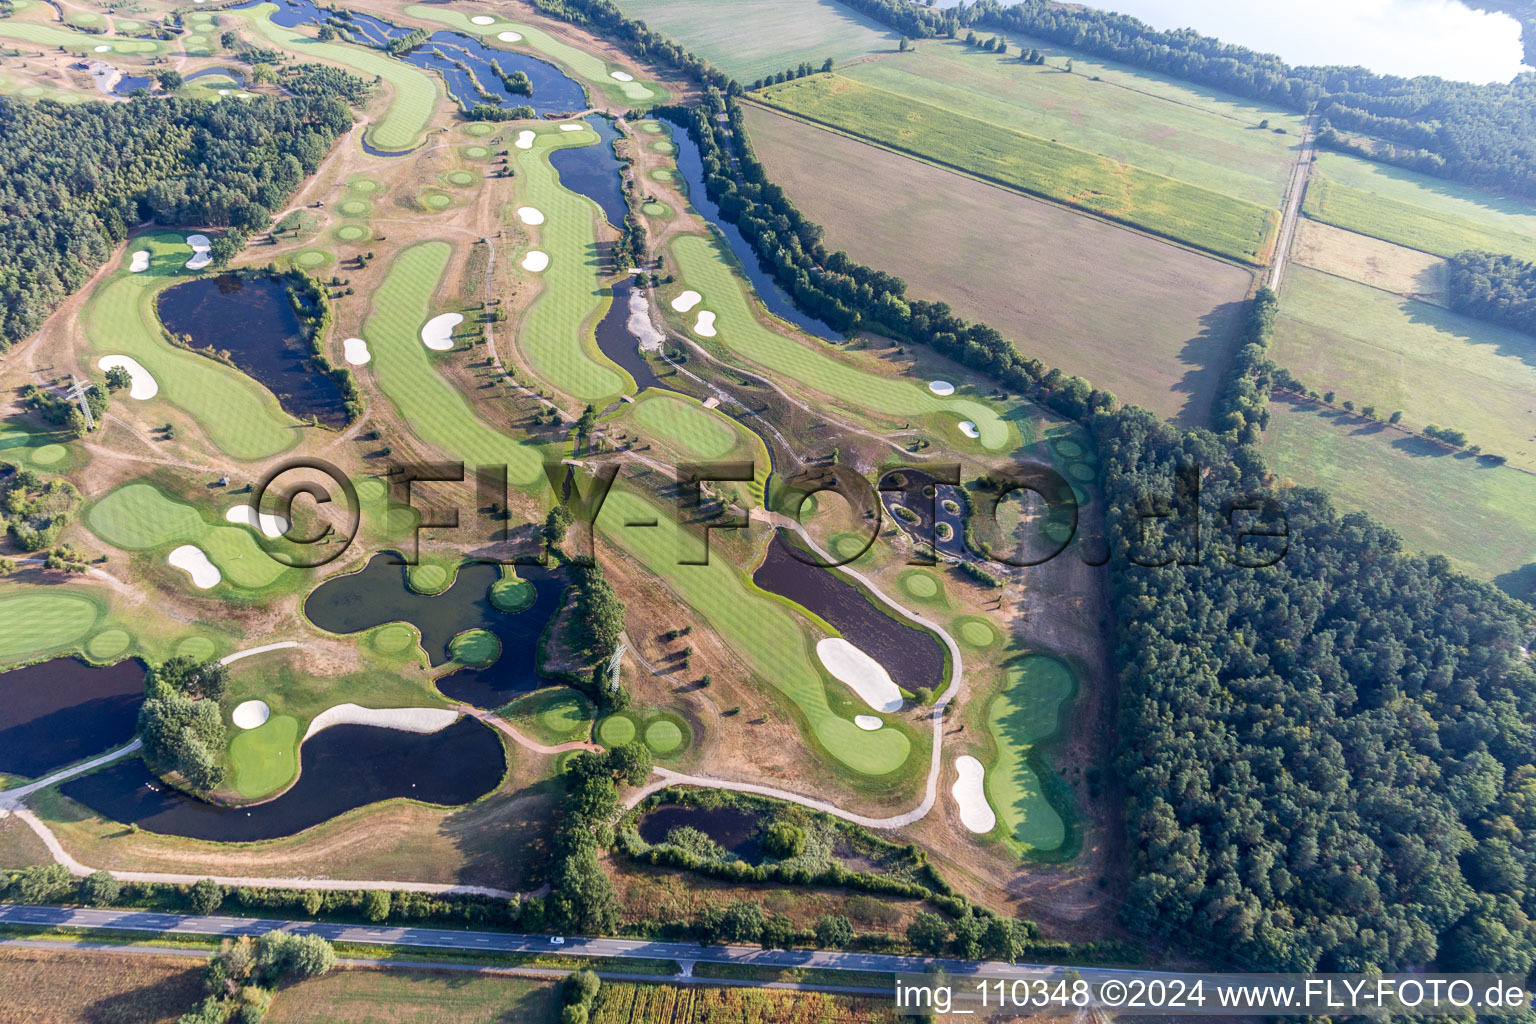 Grounds of the Golf course at Green Eagle Golf Courses in Winsen (Luhe) in the state Lower Saxony, Germany from above